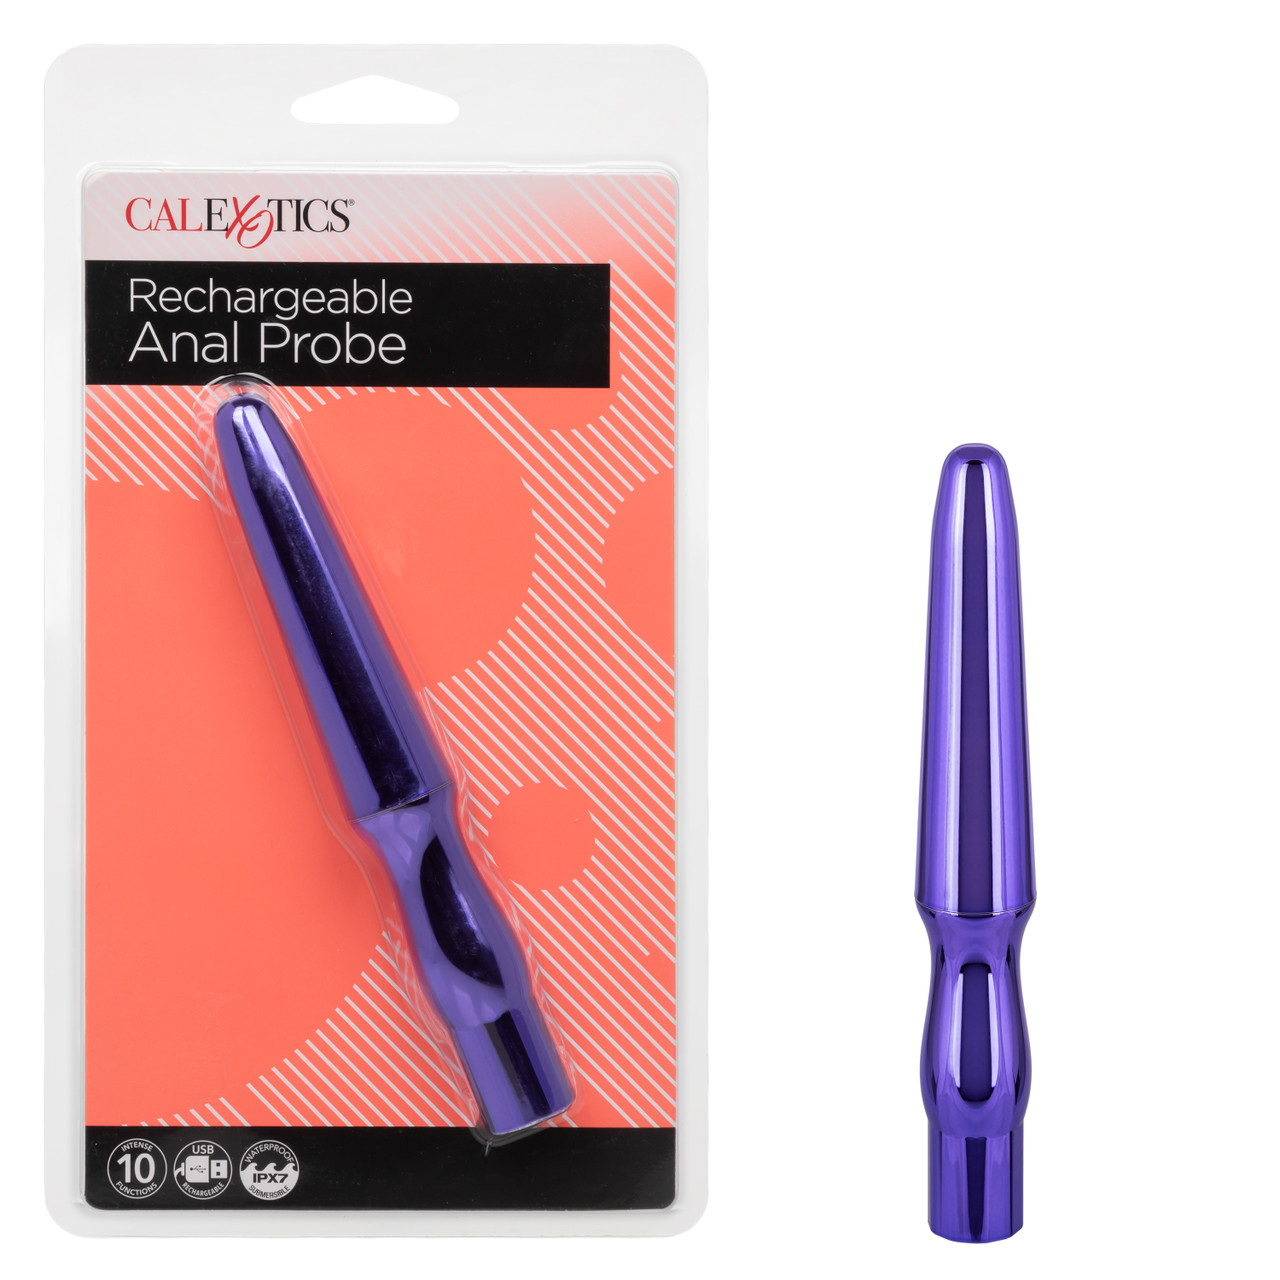 RECHARGEABLE ANAL PROBE METALLIC PURPLE - Click Image to Close